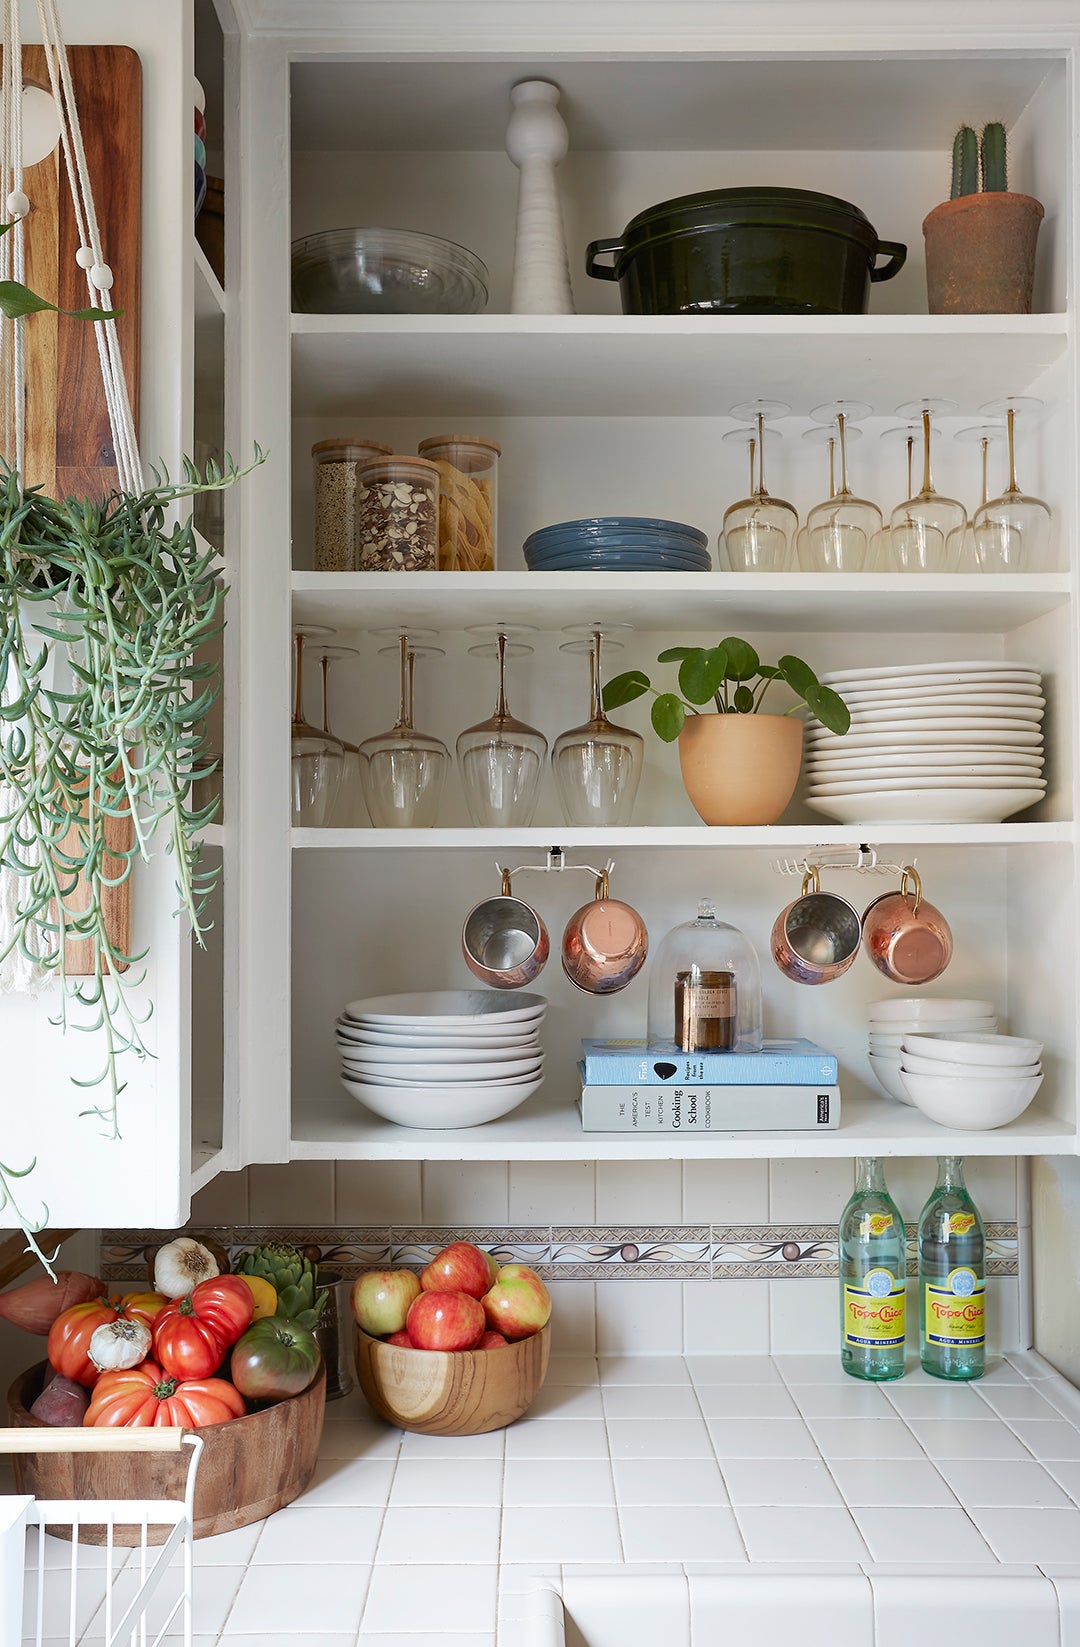 83% of Homeowners Say This Kitchen Feature Is a Hard Pass—But We Have Other Ideas